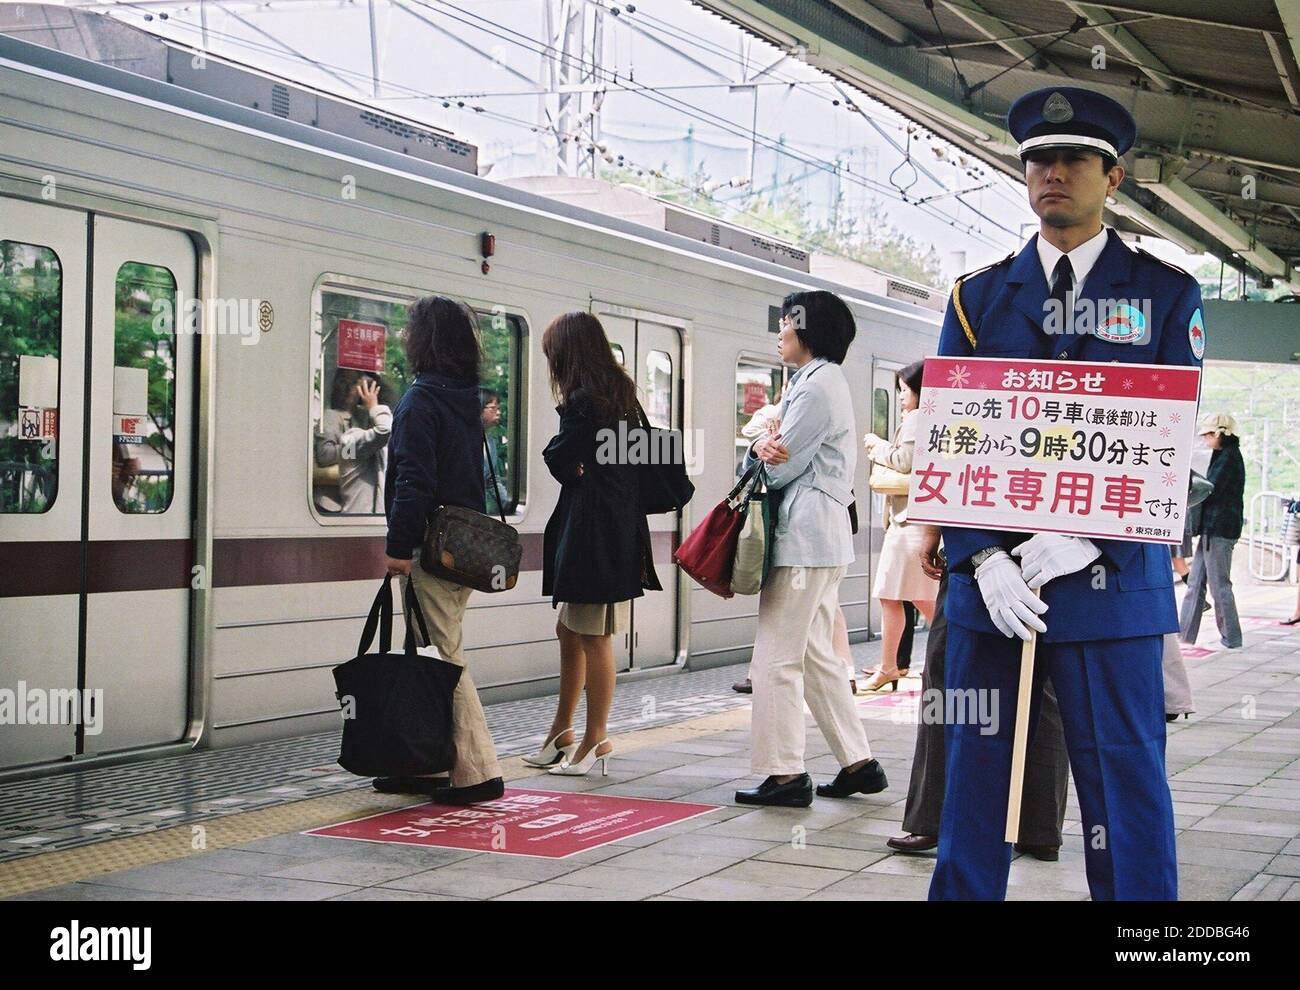 NO FILM, NO VIDEO, NO TV, NO DOCUMENTARY - A security guard holds a sign marking a train car reserved for women only at the Tama Plaza station in Yokohama, Japan, on May 17, 2005. Several train companies introduced the reserved cars to cut down on harassment. Photo by Emi Doi/KRT/ABACA Stock Photo